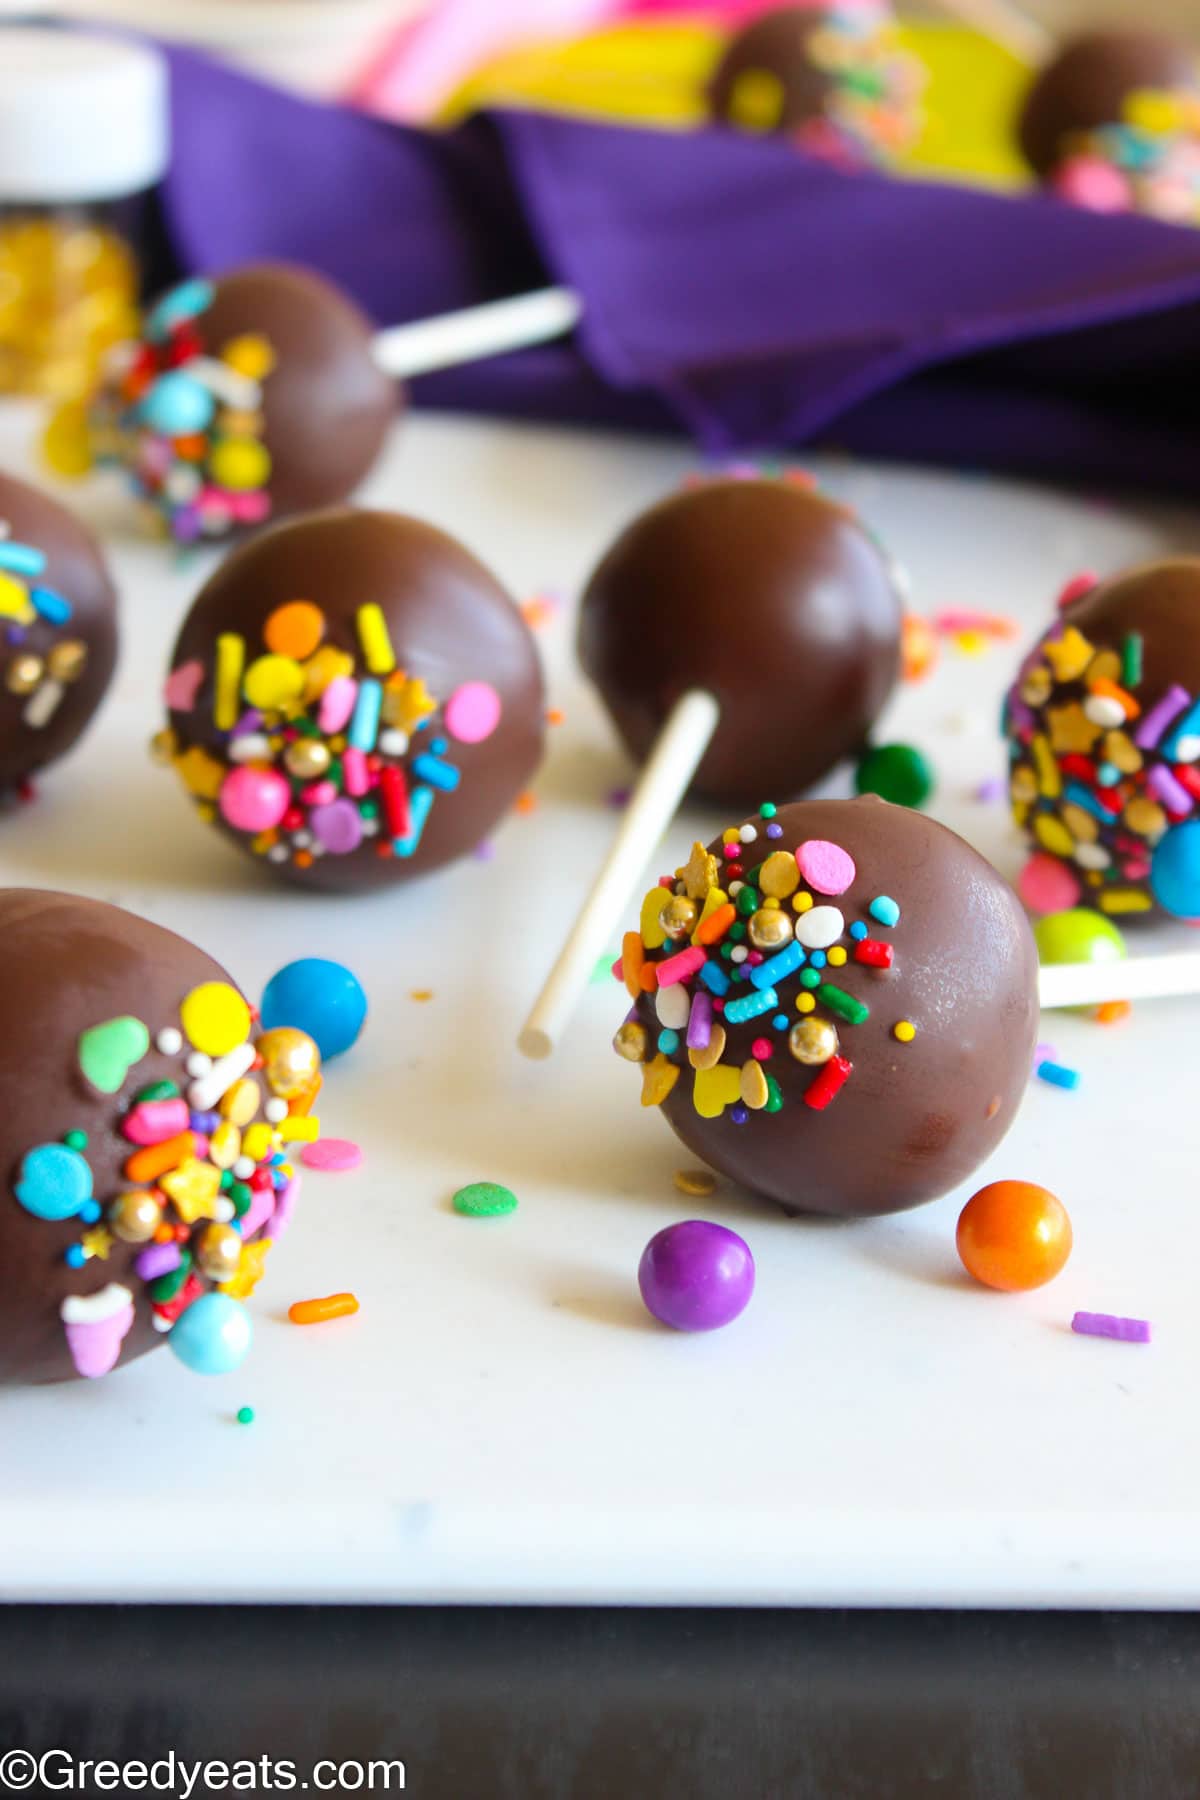 Quick and easy cake pops made with store bought cake mix and chocolate frosting.